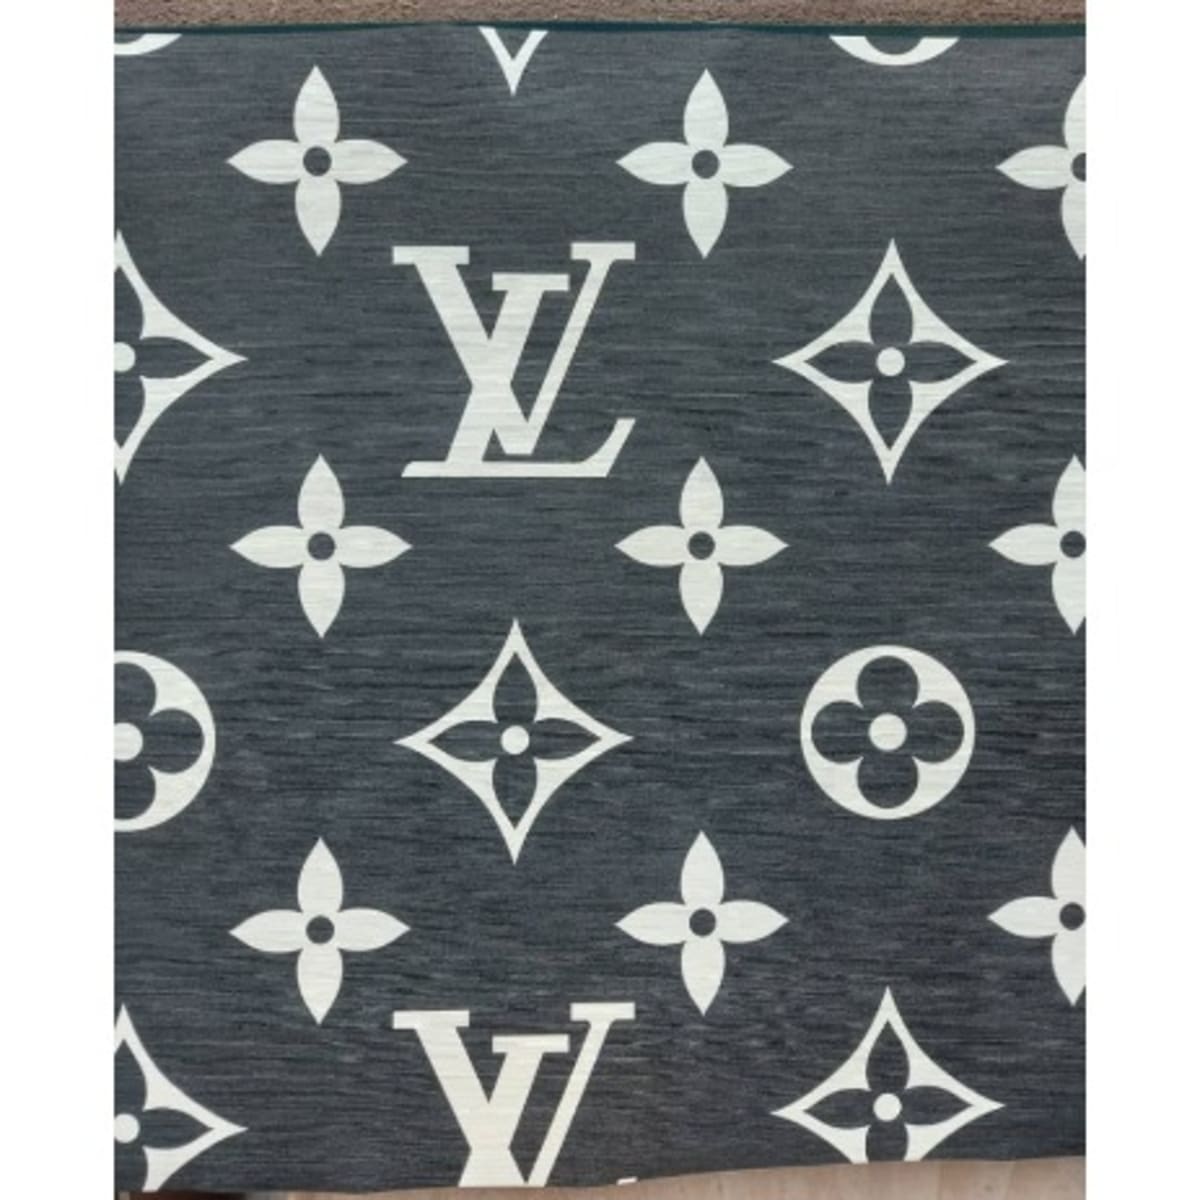 lv wall sign